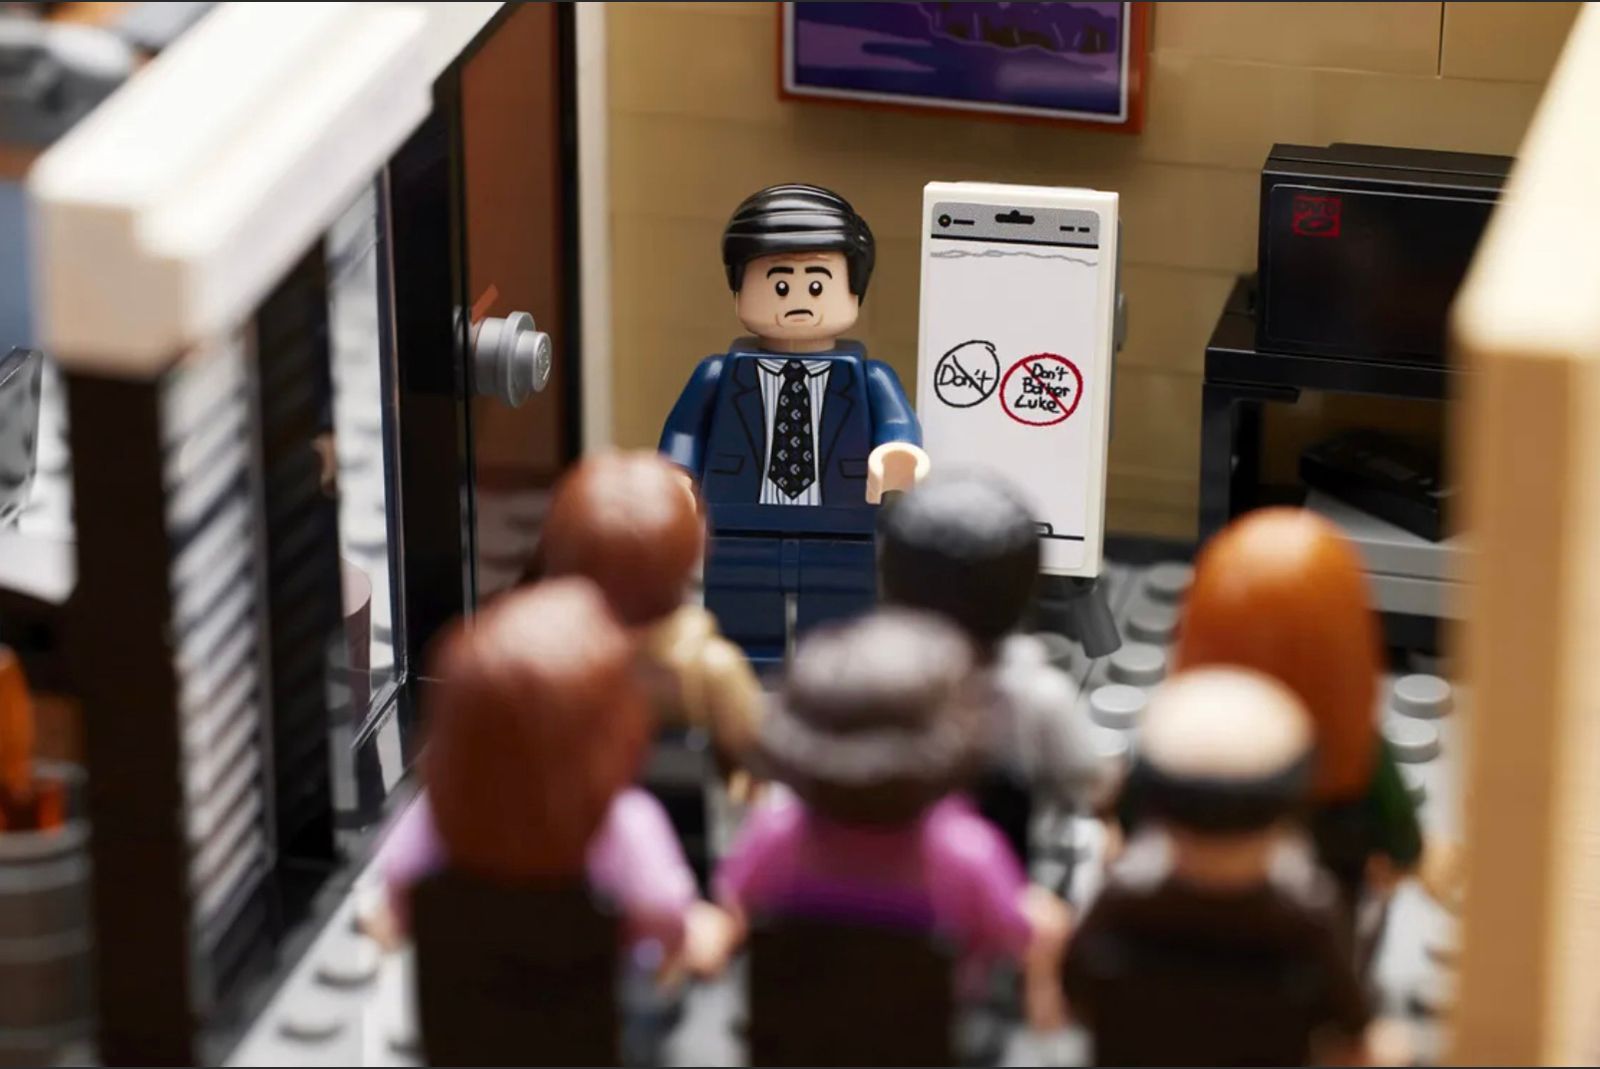 Lego's new 'The Office' set is missing Andy